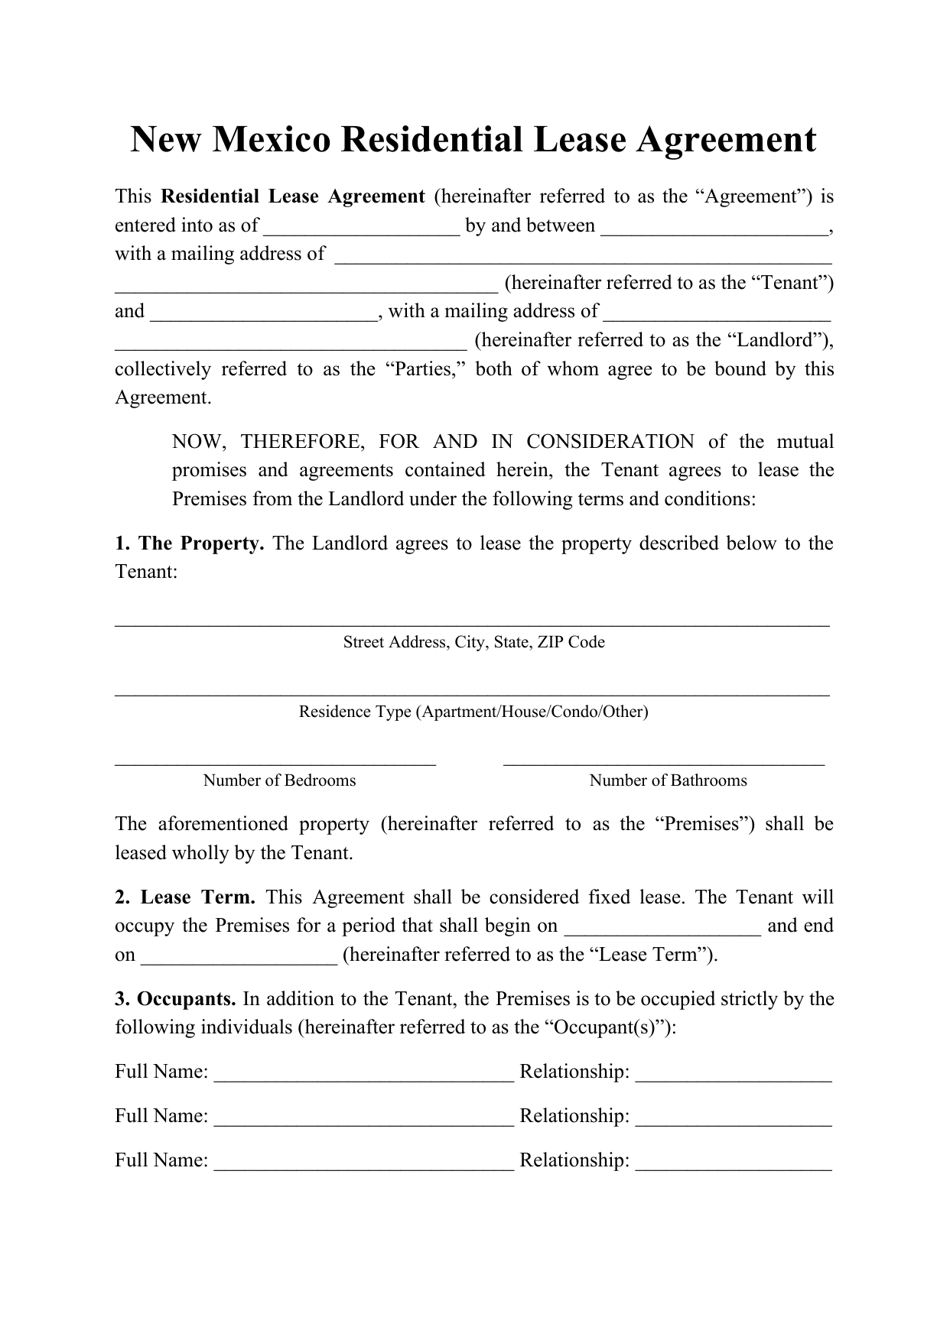 new-mexico-residential-lease-agreement-template-fill-out-sign-online